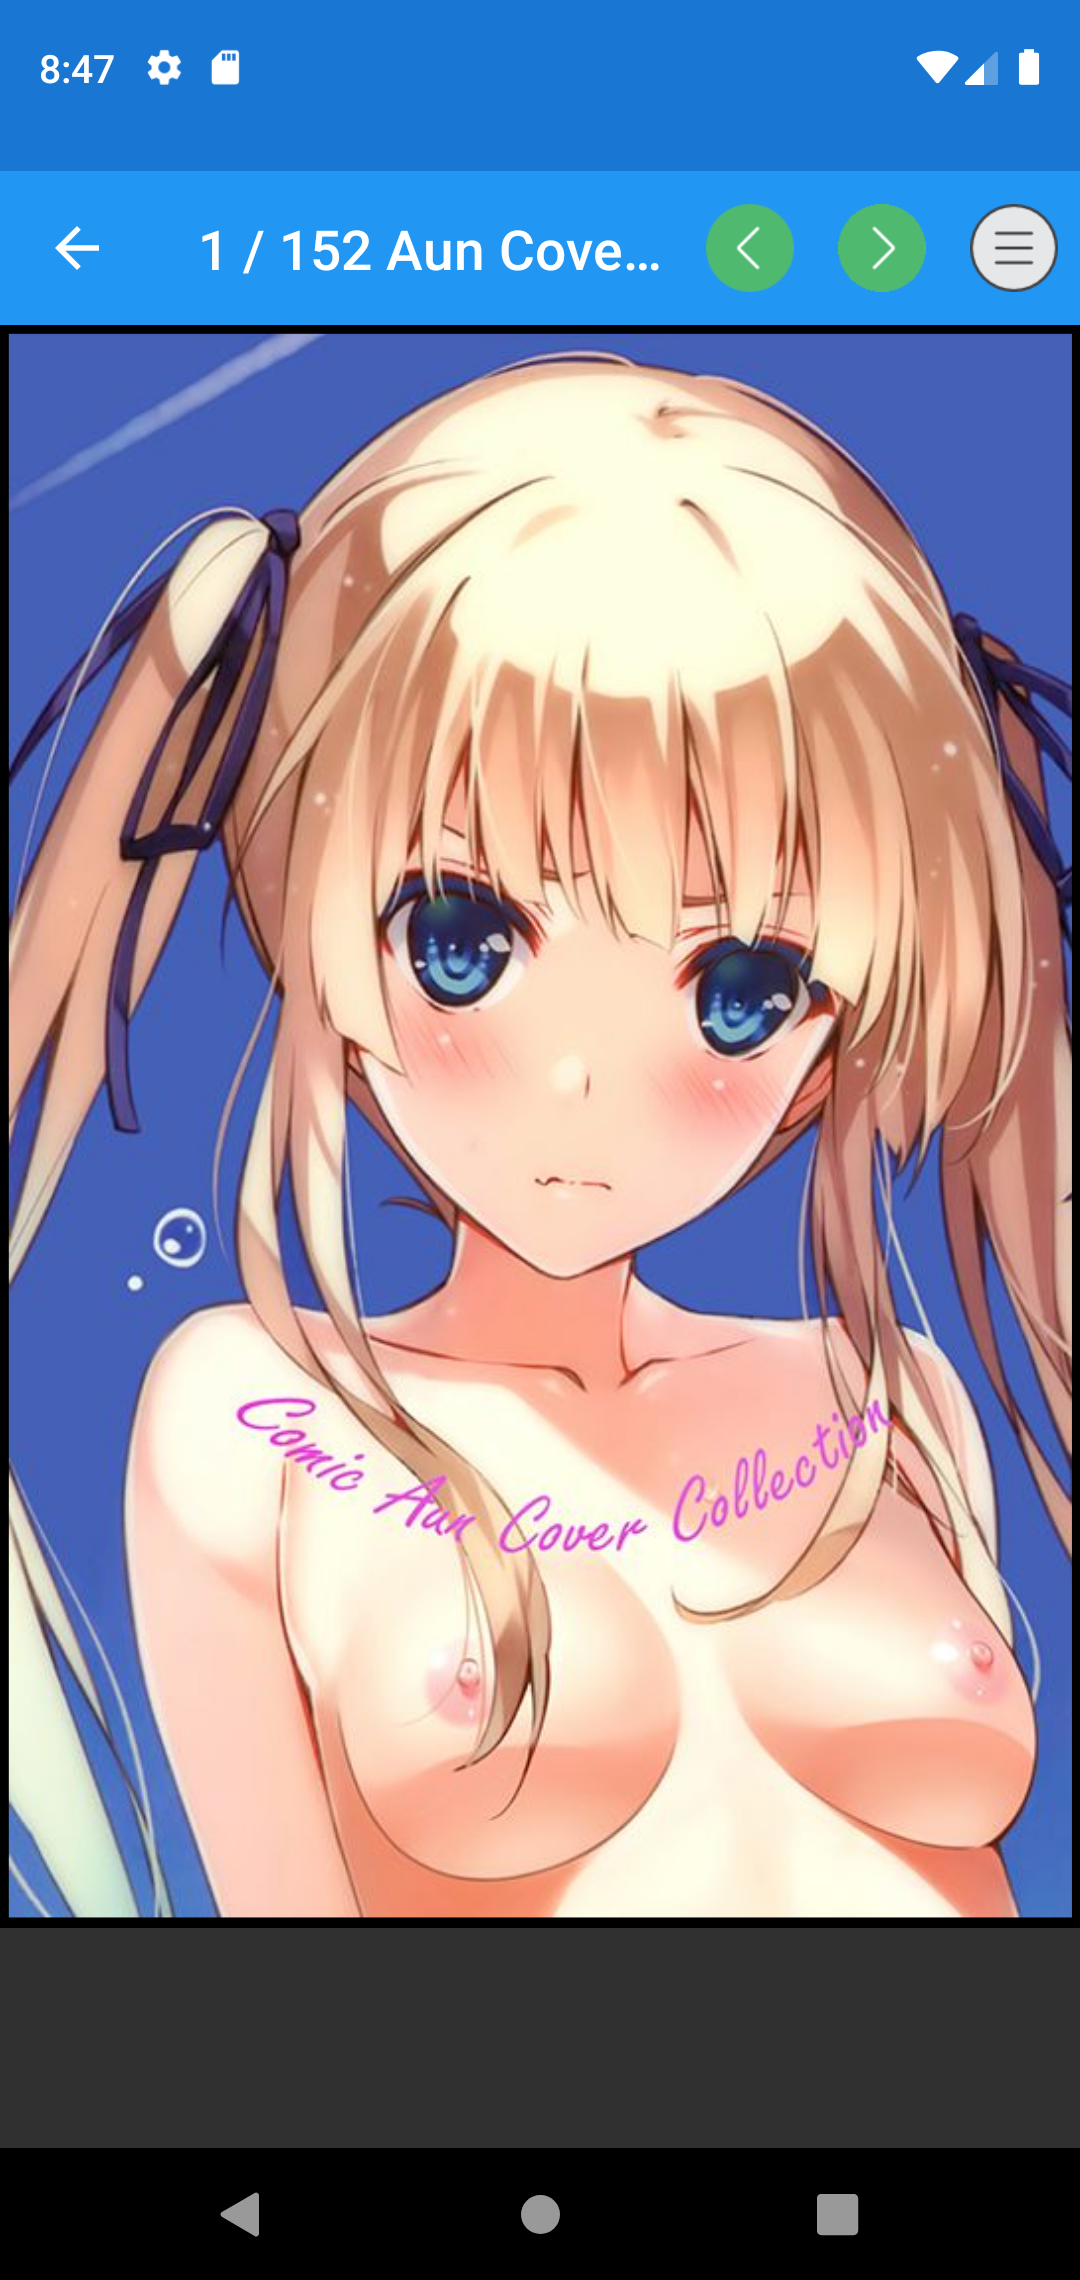 Sockings Collections hot,aplikasi,android,stockings,walpapers,adult,app,image,photos,hentai,comics,nhentai,porn,pics,oictures,download,cosplay,sexy,panties,free,pictures,apk,wallpaper,viewer,apps,anime